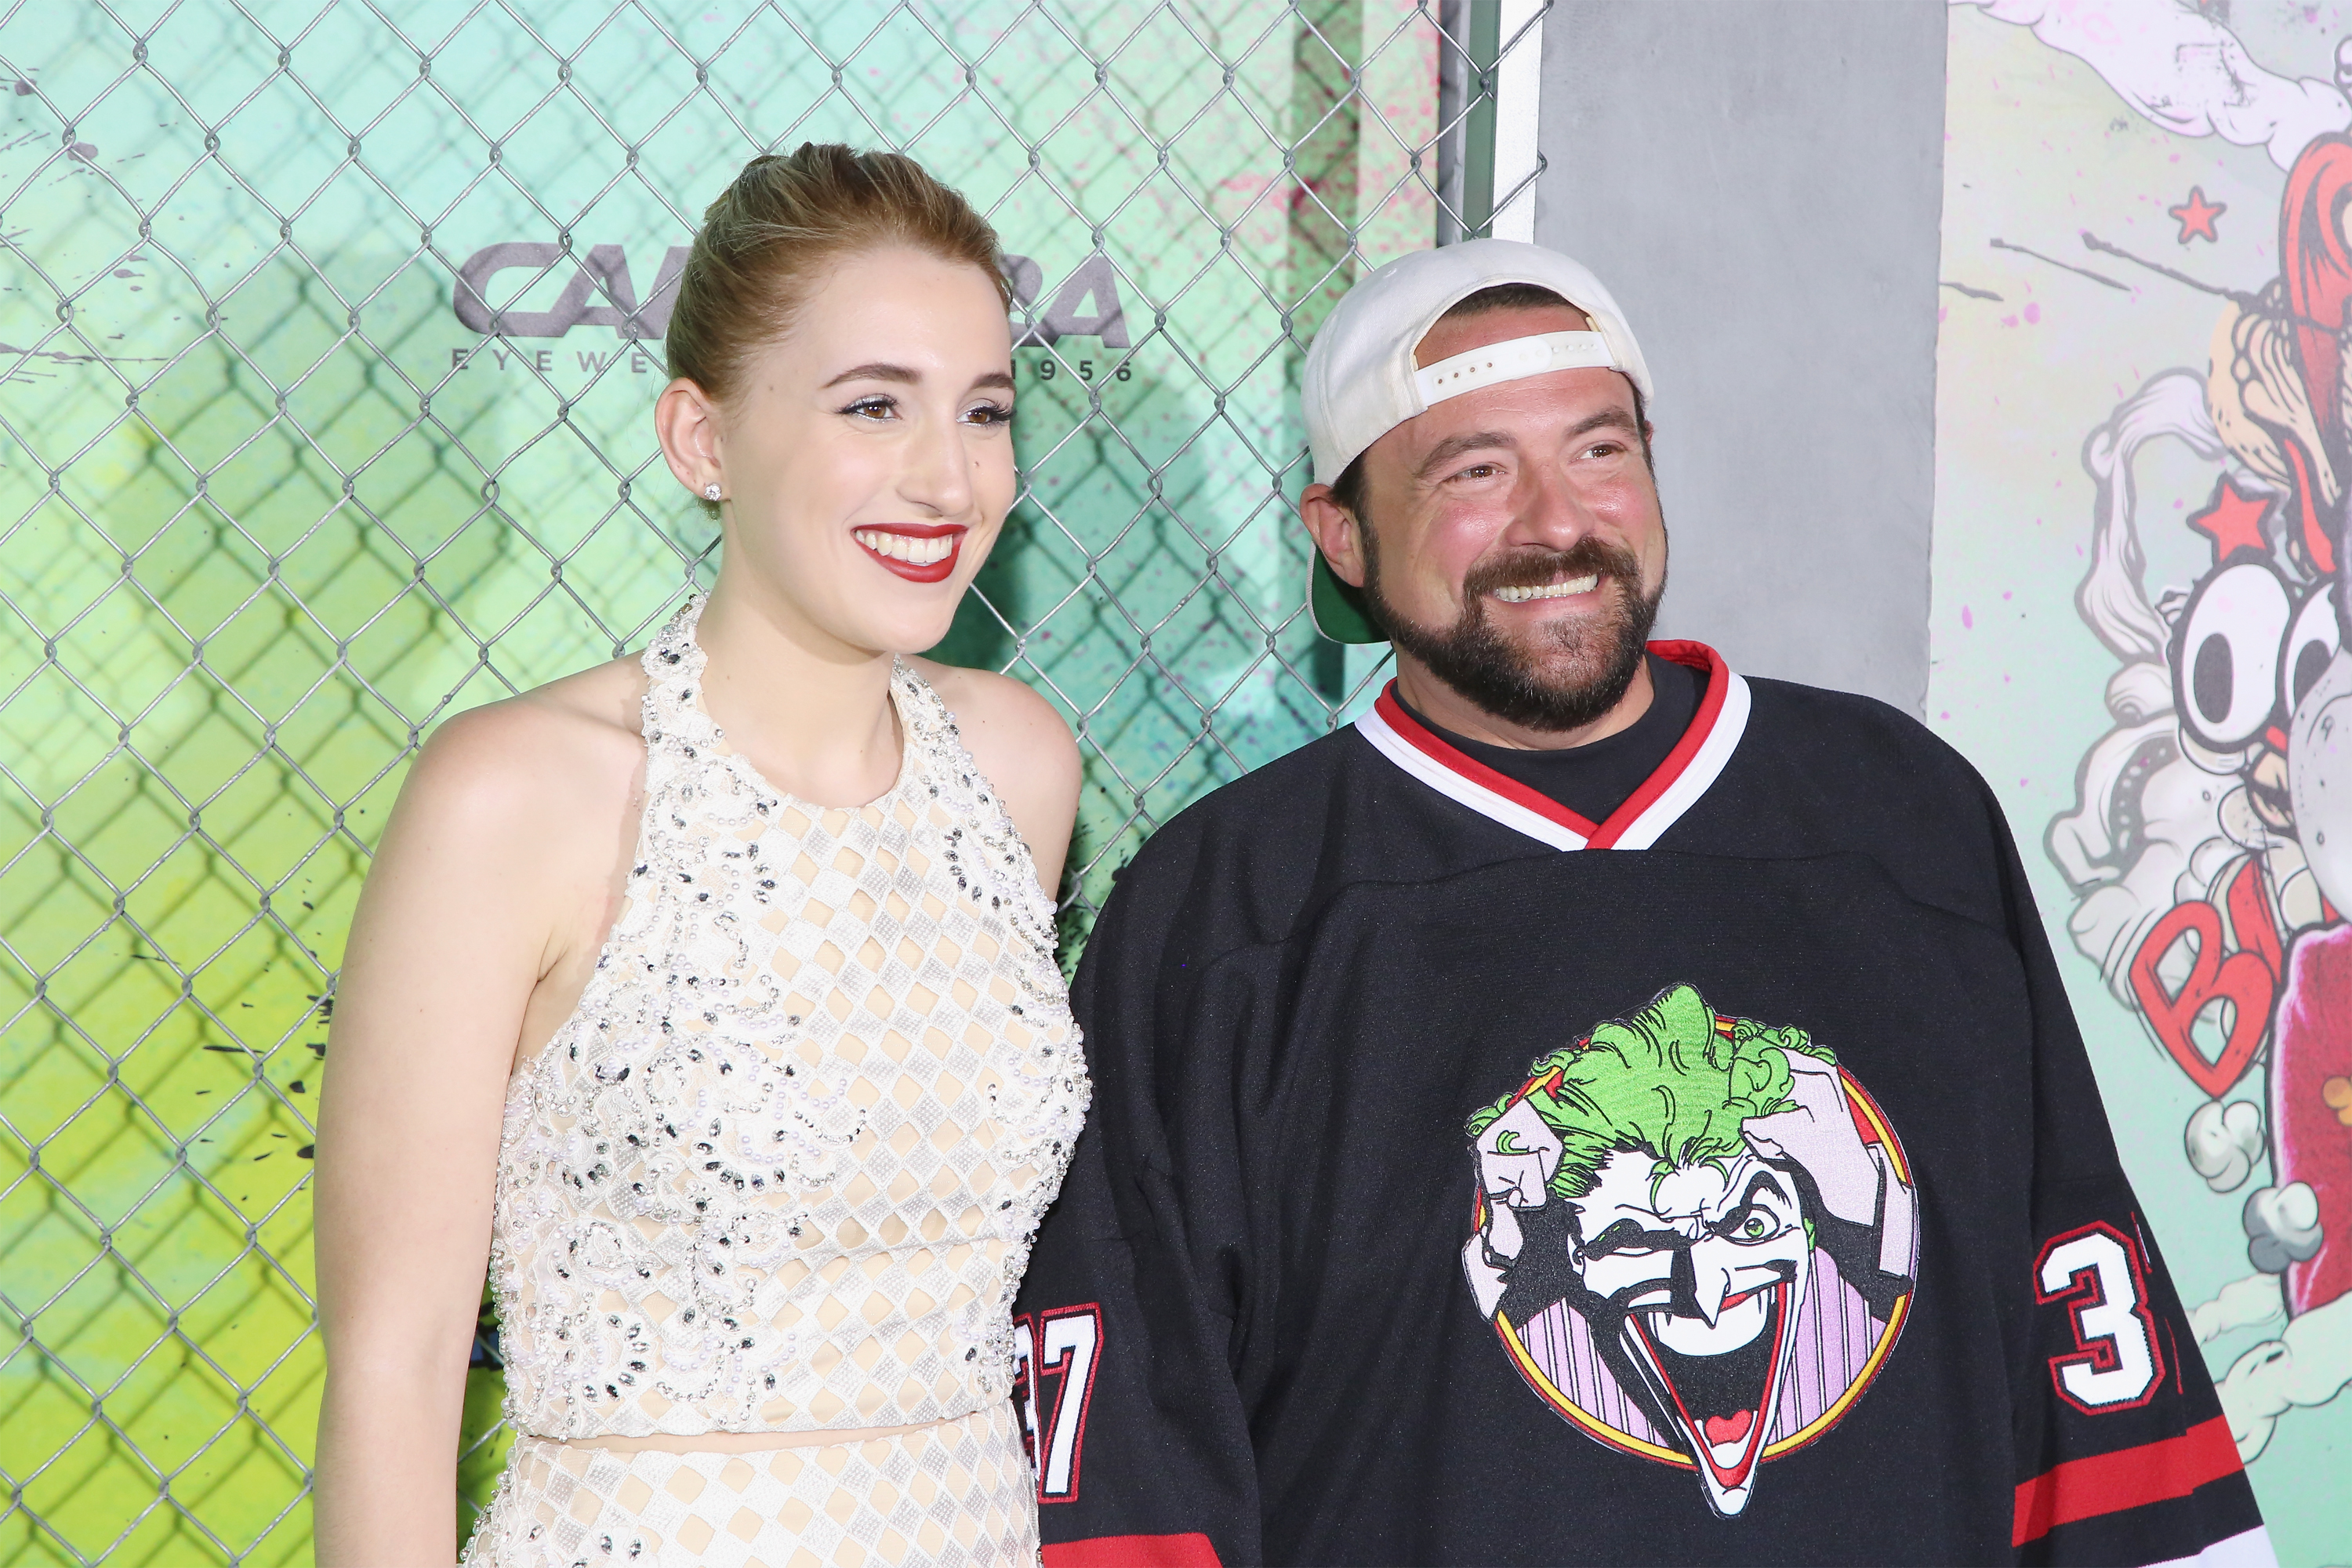 Harley Quinn Smith and Kevin Smith attend the "Suicide Squad" world premiere at The Beacon Theatre on August 1, 2016 in New York City. (Mireya Acierto&mdash;FilmMagic/Getty Images)